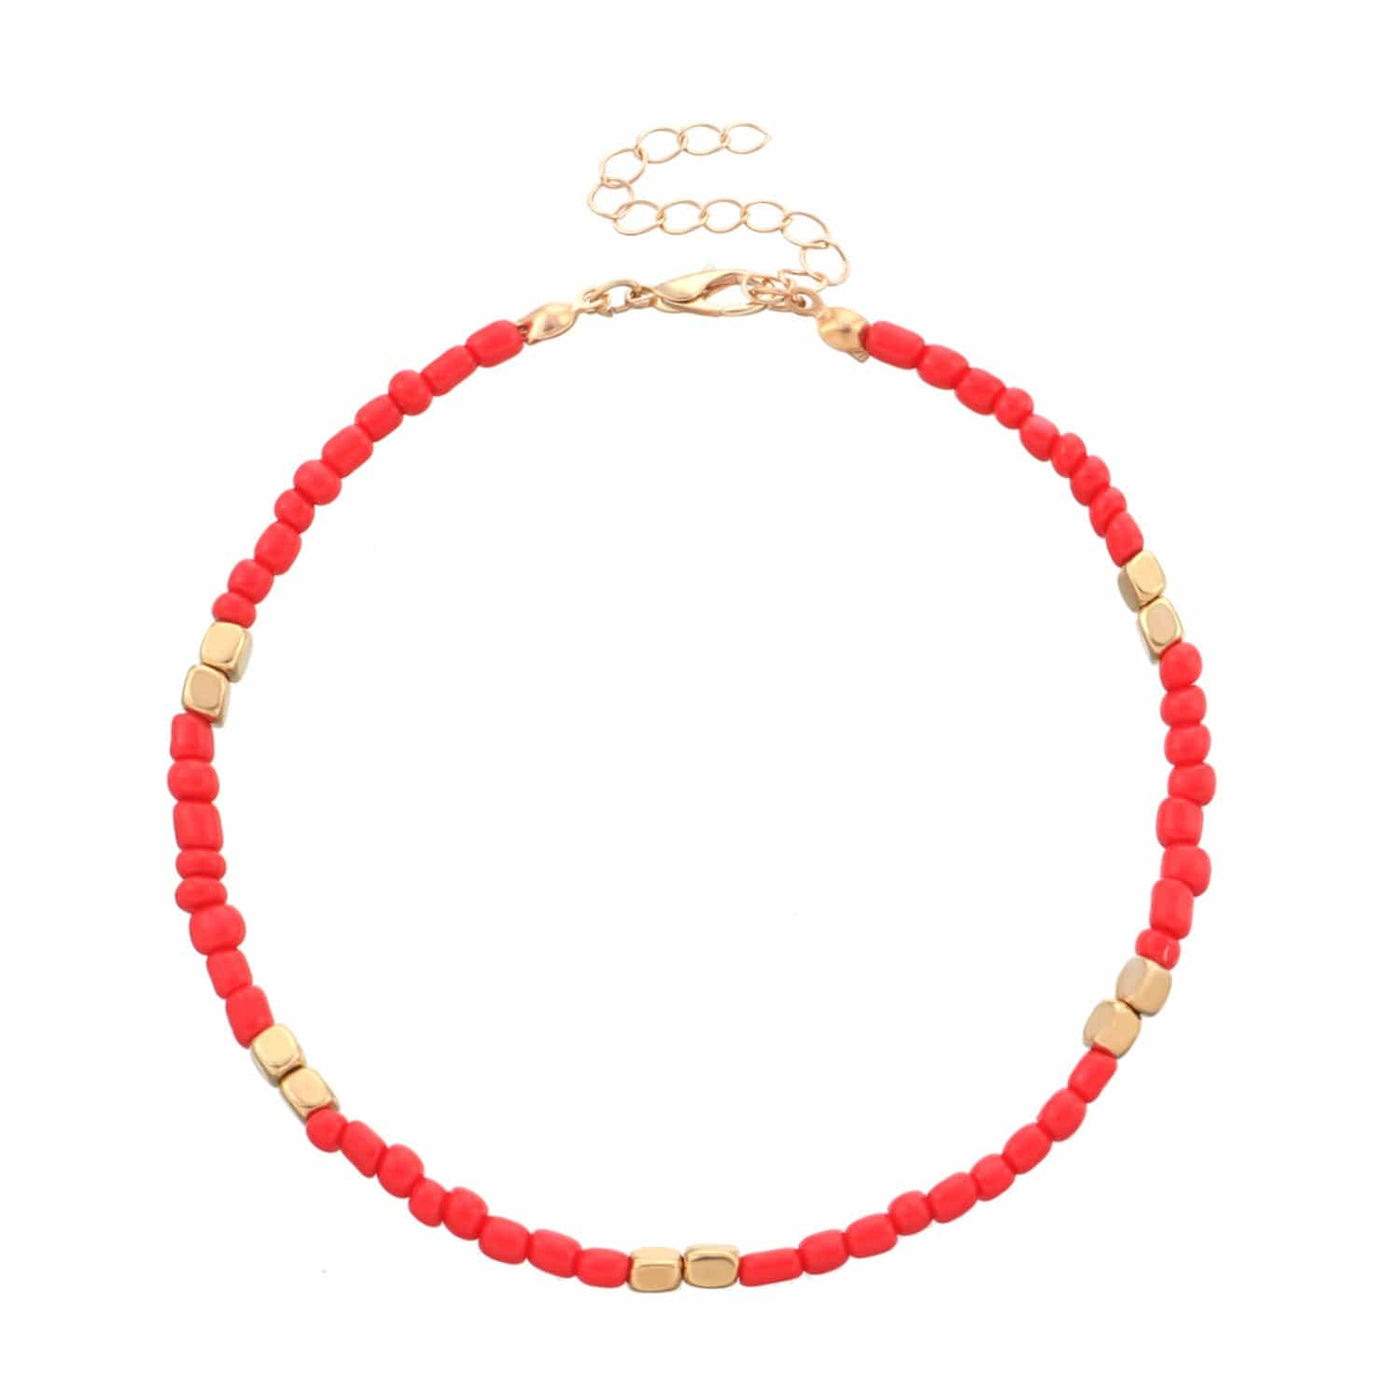 BROOCHITON Anklets Red New Golden Rice Bead Beach Anklet Women